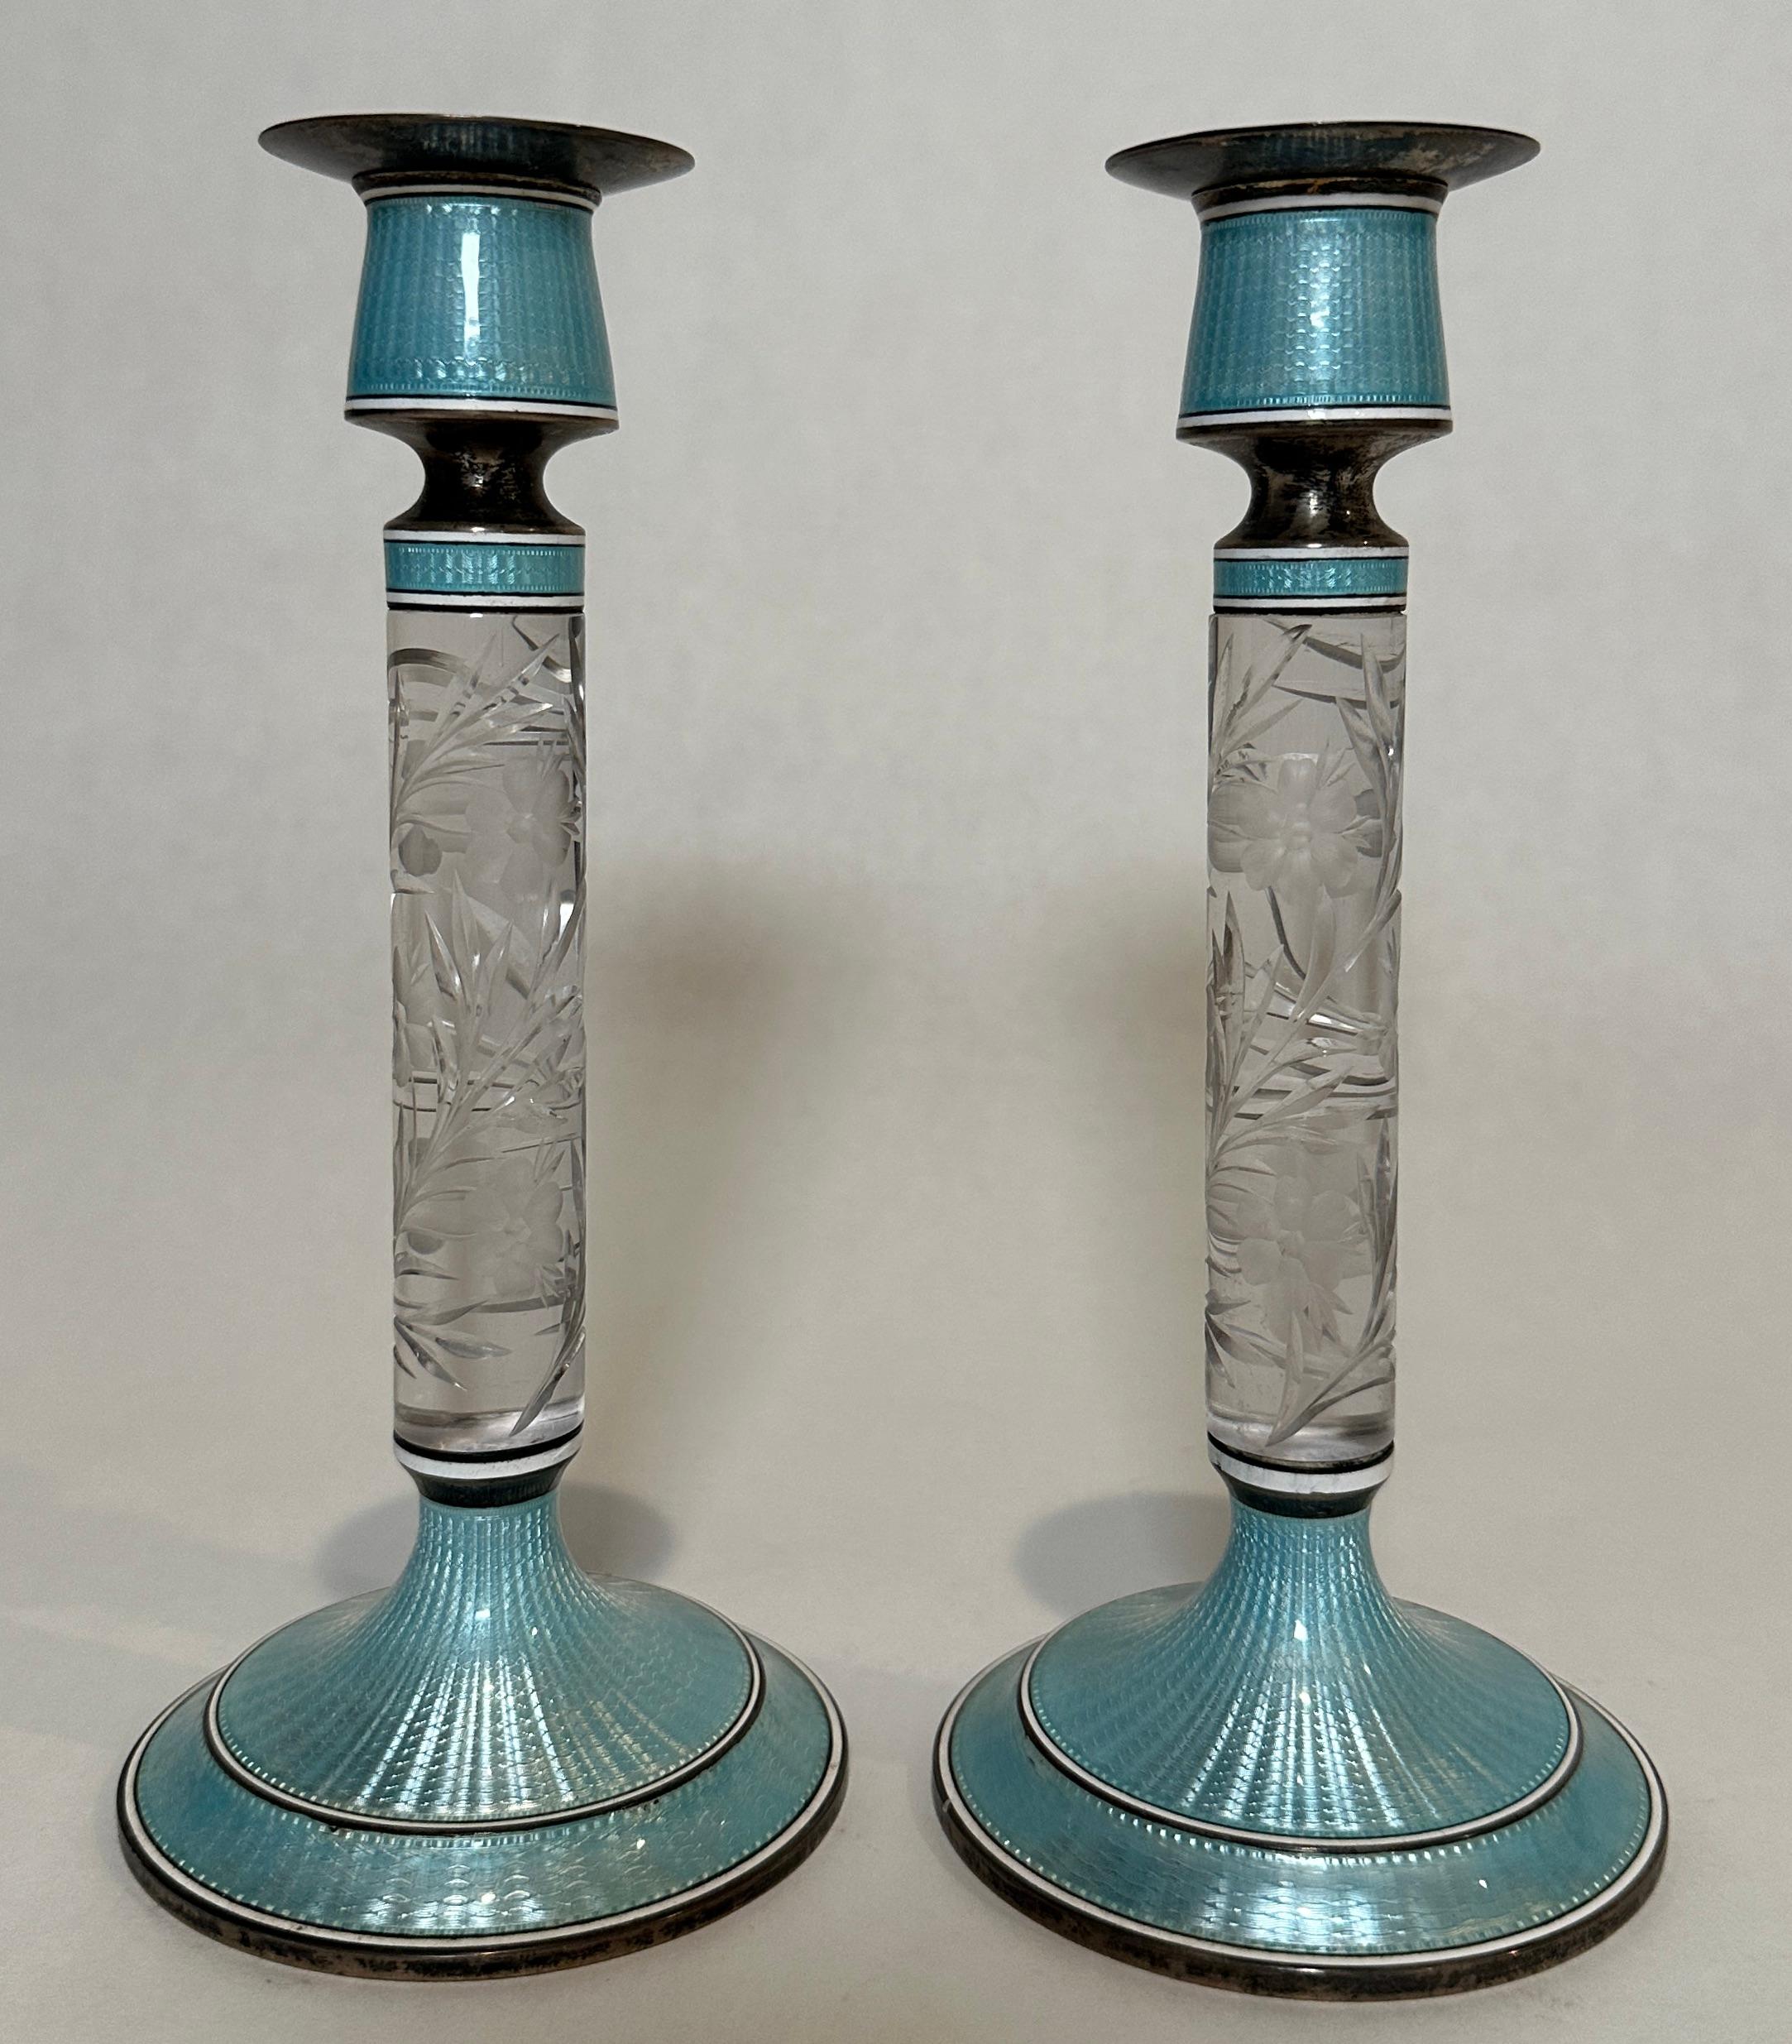 Fine tall pair of blue guilloche enamel sterling silver candle holders. Marked Sterling with additional hallmarks. Floral cut glass columns mounted top and bottom with sterling and guilloche enamel.